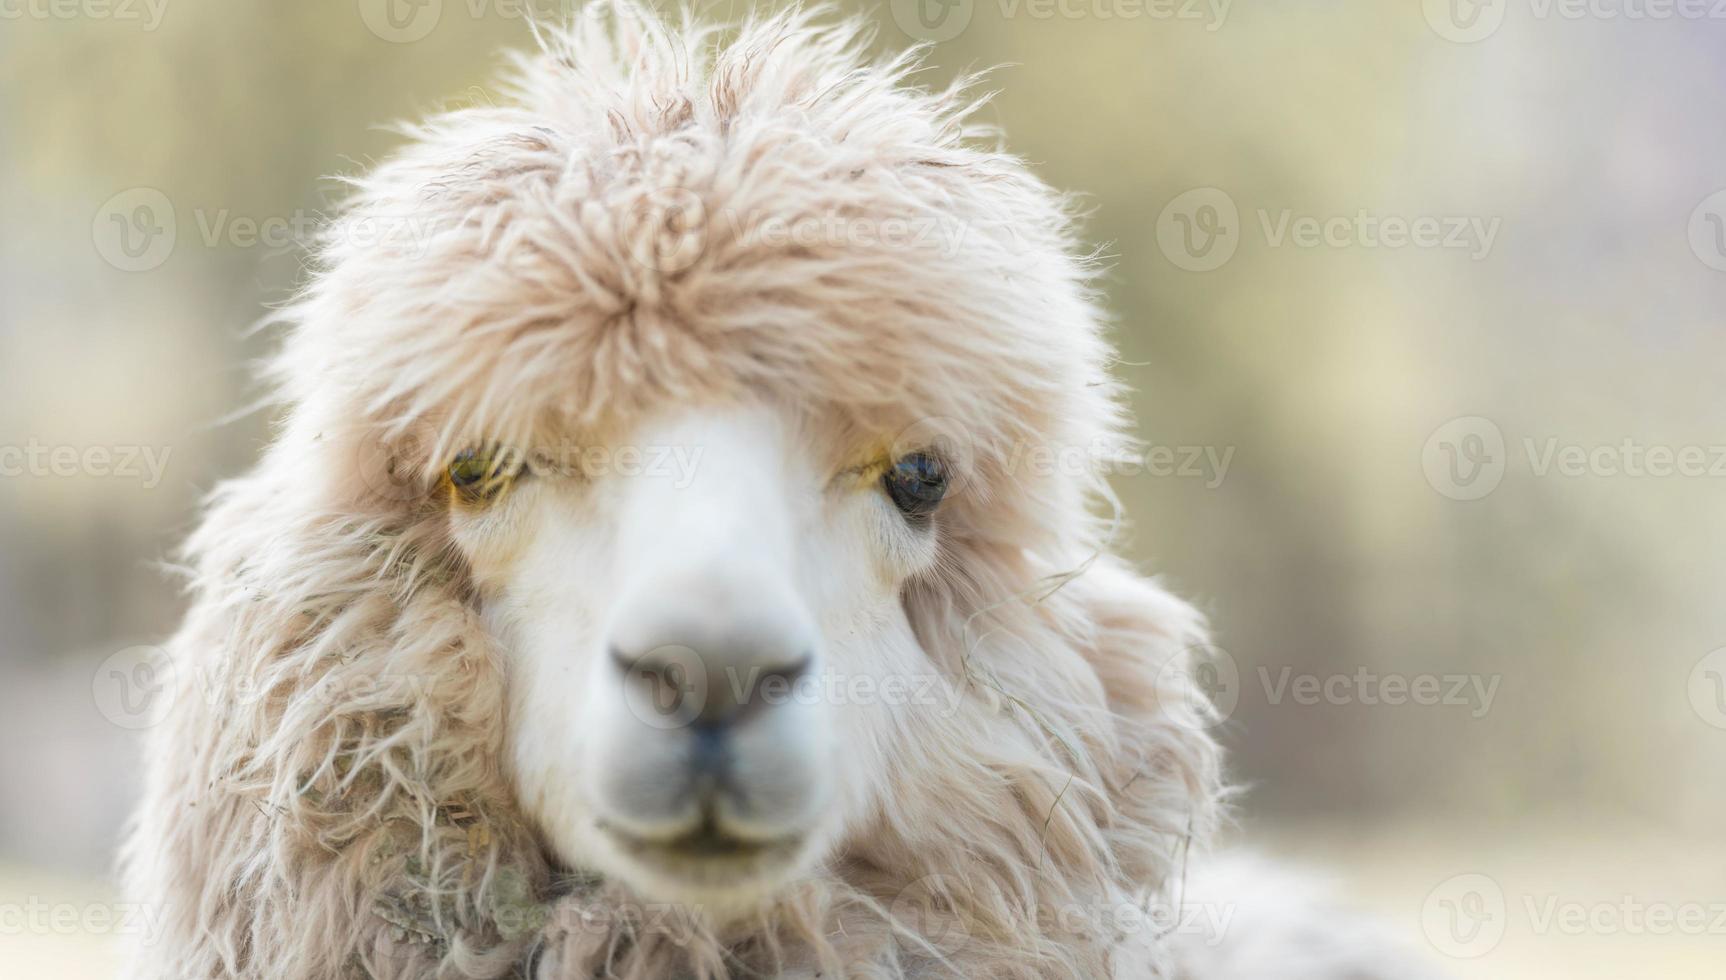 Cute Alpaca face in farm, focus on eyes, close-up with copy space. photo